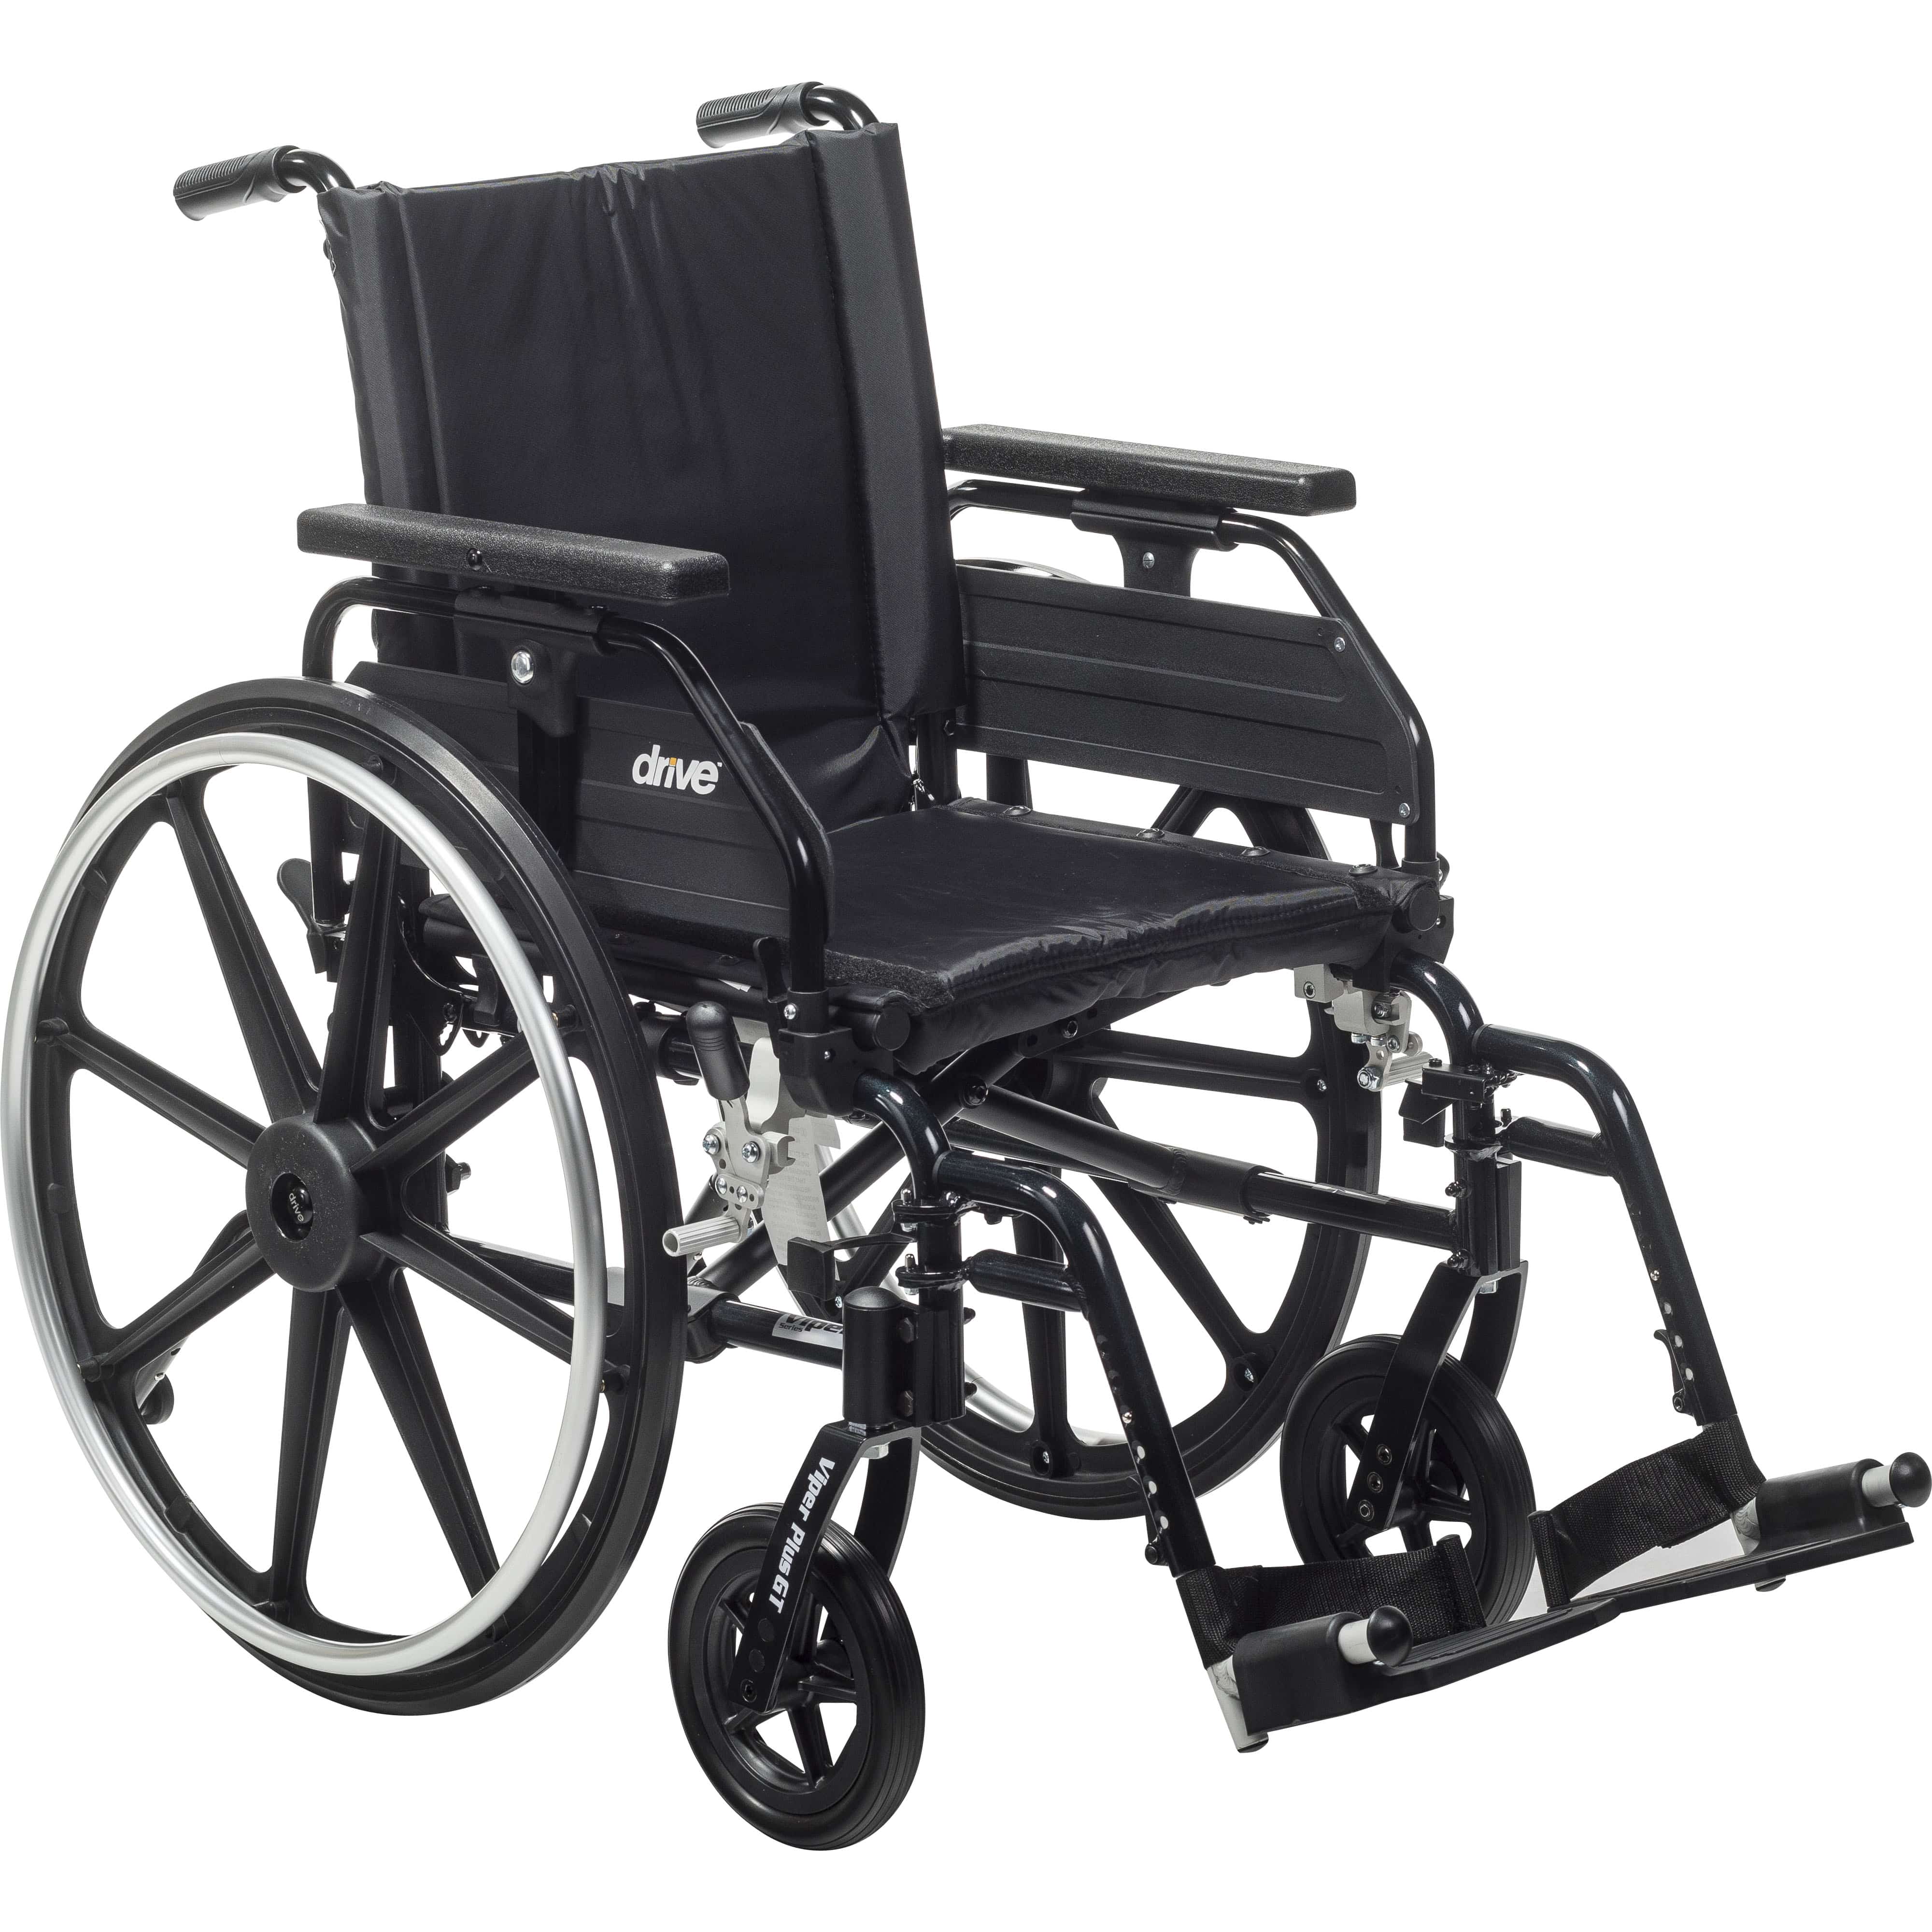 Drive Medical Wheelchairs Swing-Away Footrests / 16" Seat Drive Medical Viper Plus GT Wheelchair with Universal Armrests